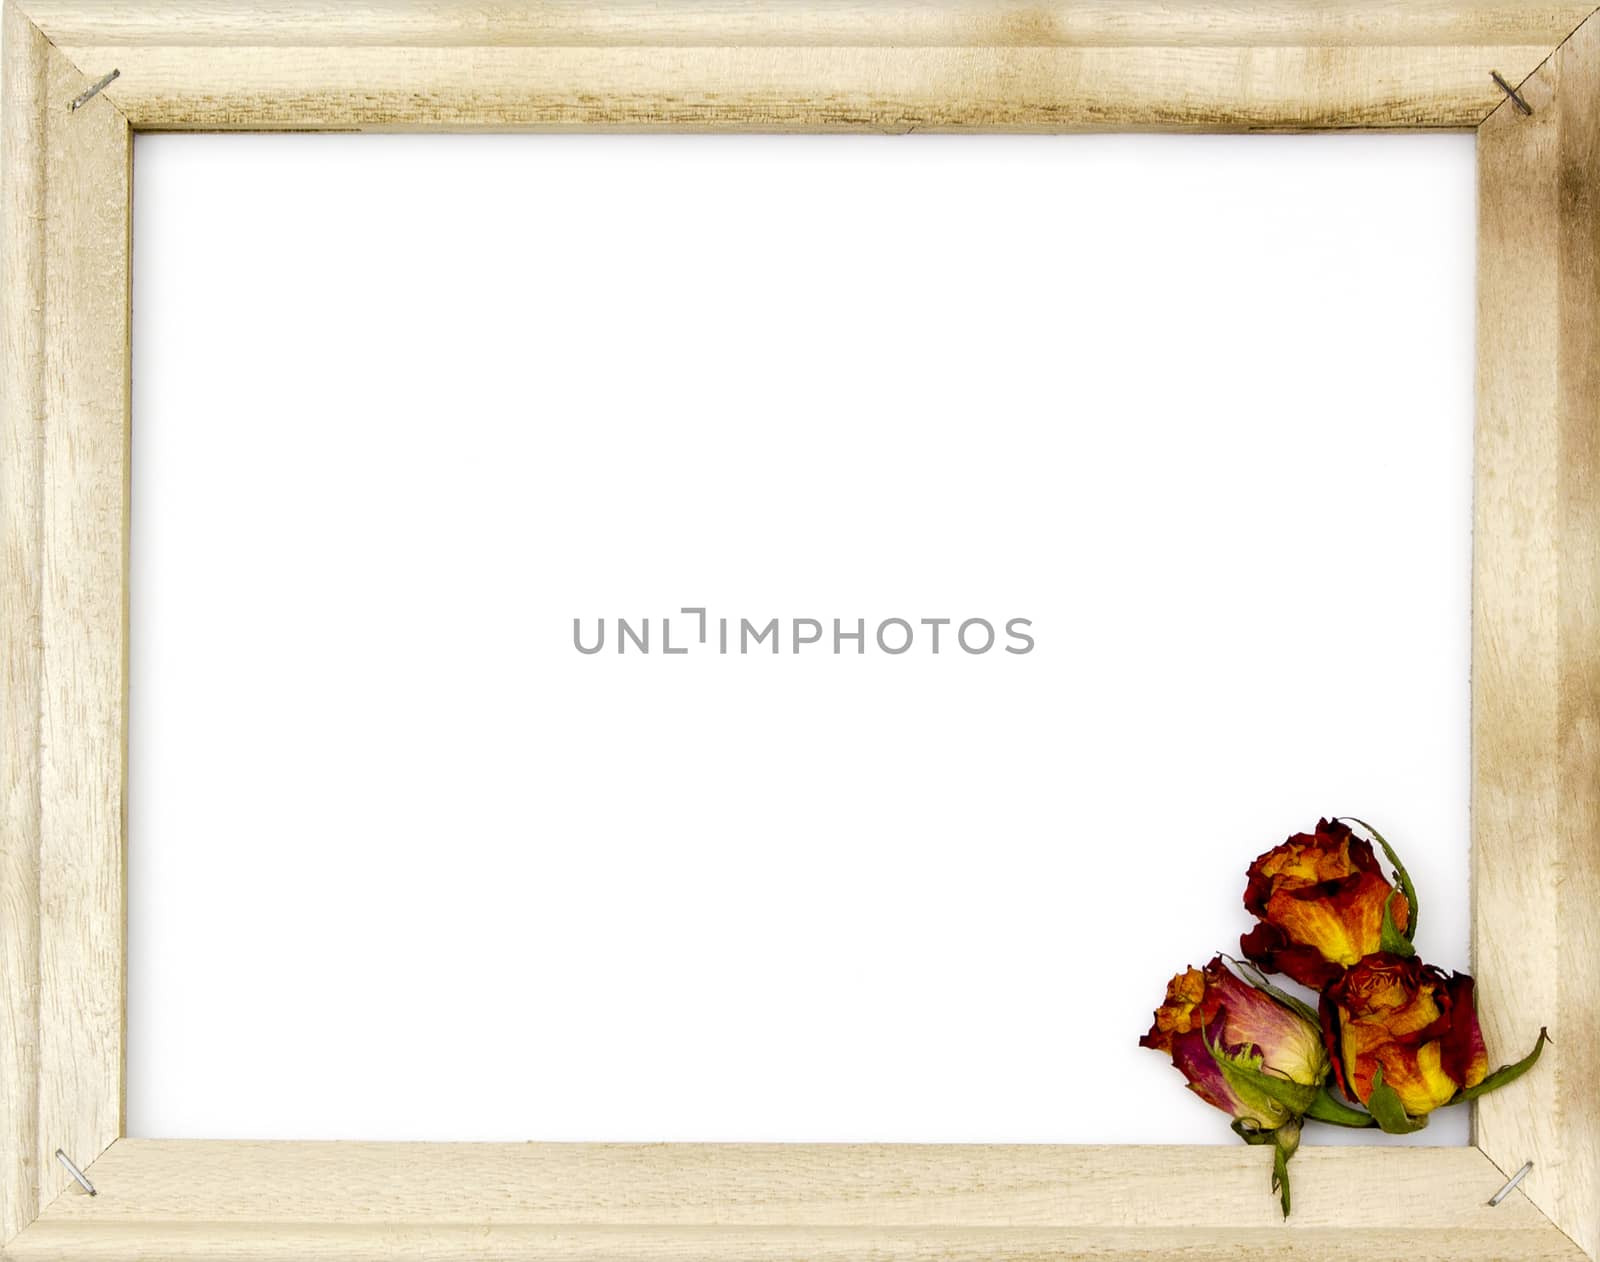 three dried roses in old picture frame by miradrozdowski